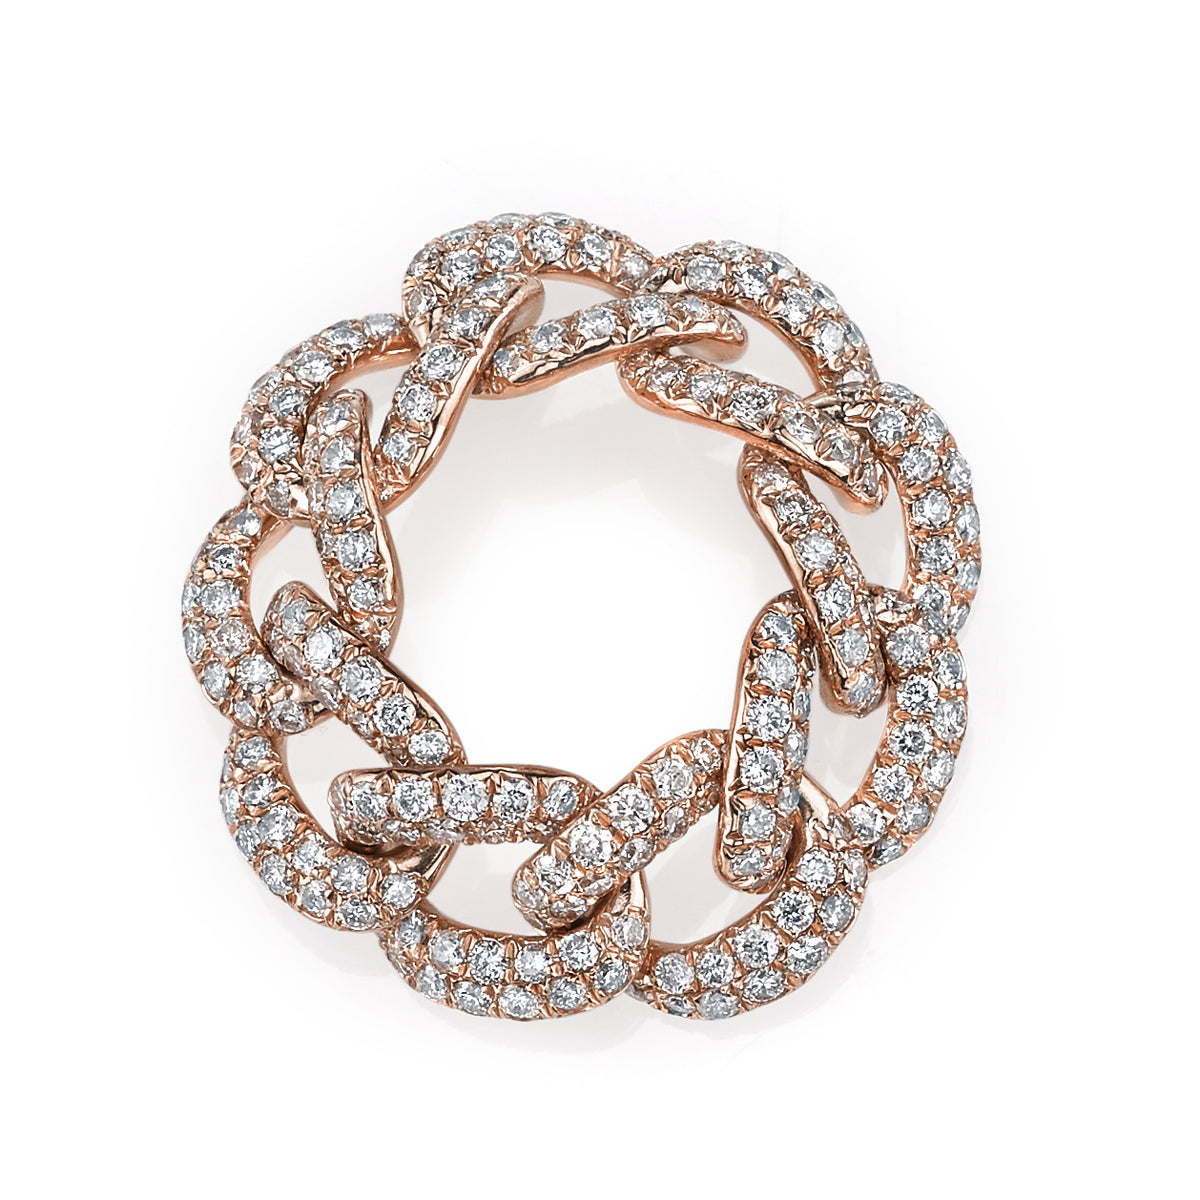 READY TO SHIP DIAMOND PAVE ESSENTIAL LINK RING